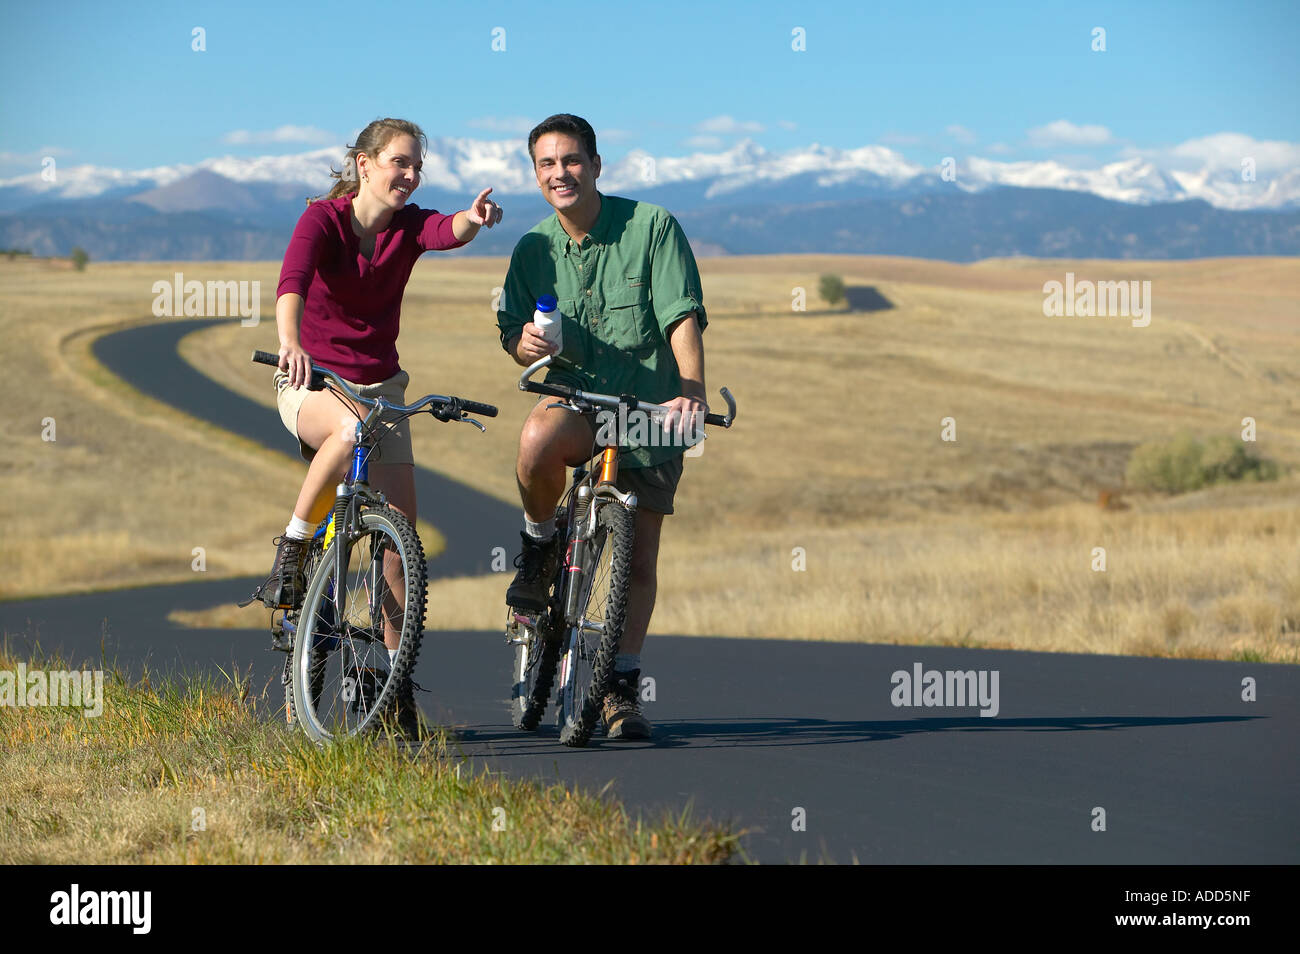 Smiling middle aged couple riding bikes on a trail with mountain range in the background Women points Stock Photo